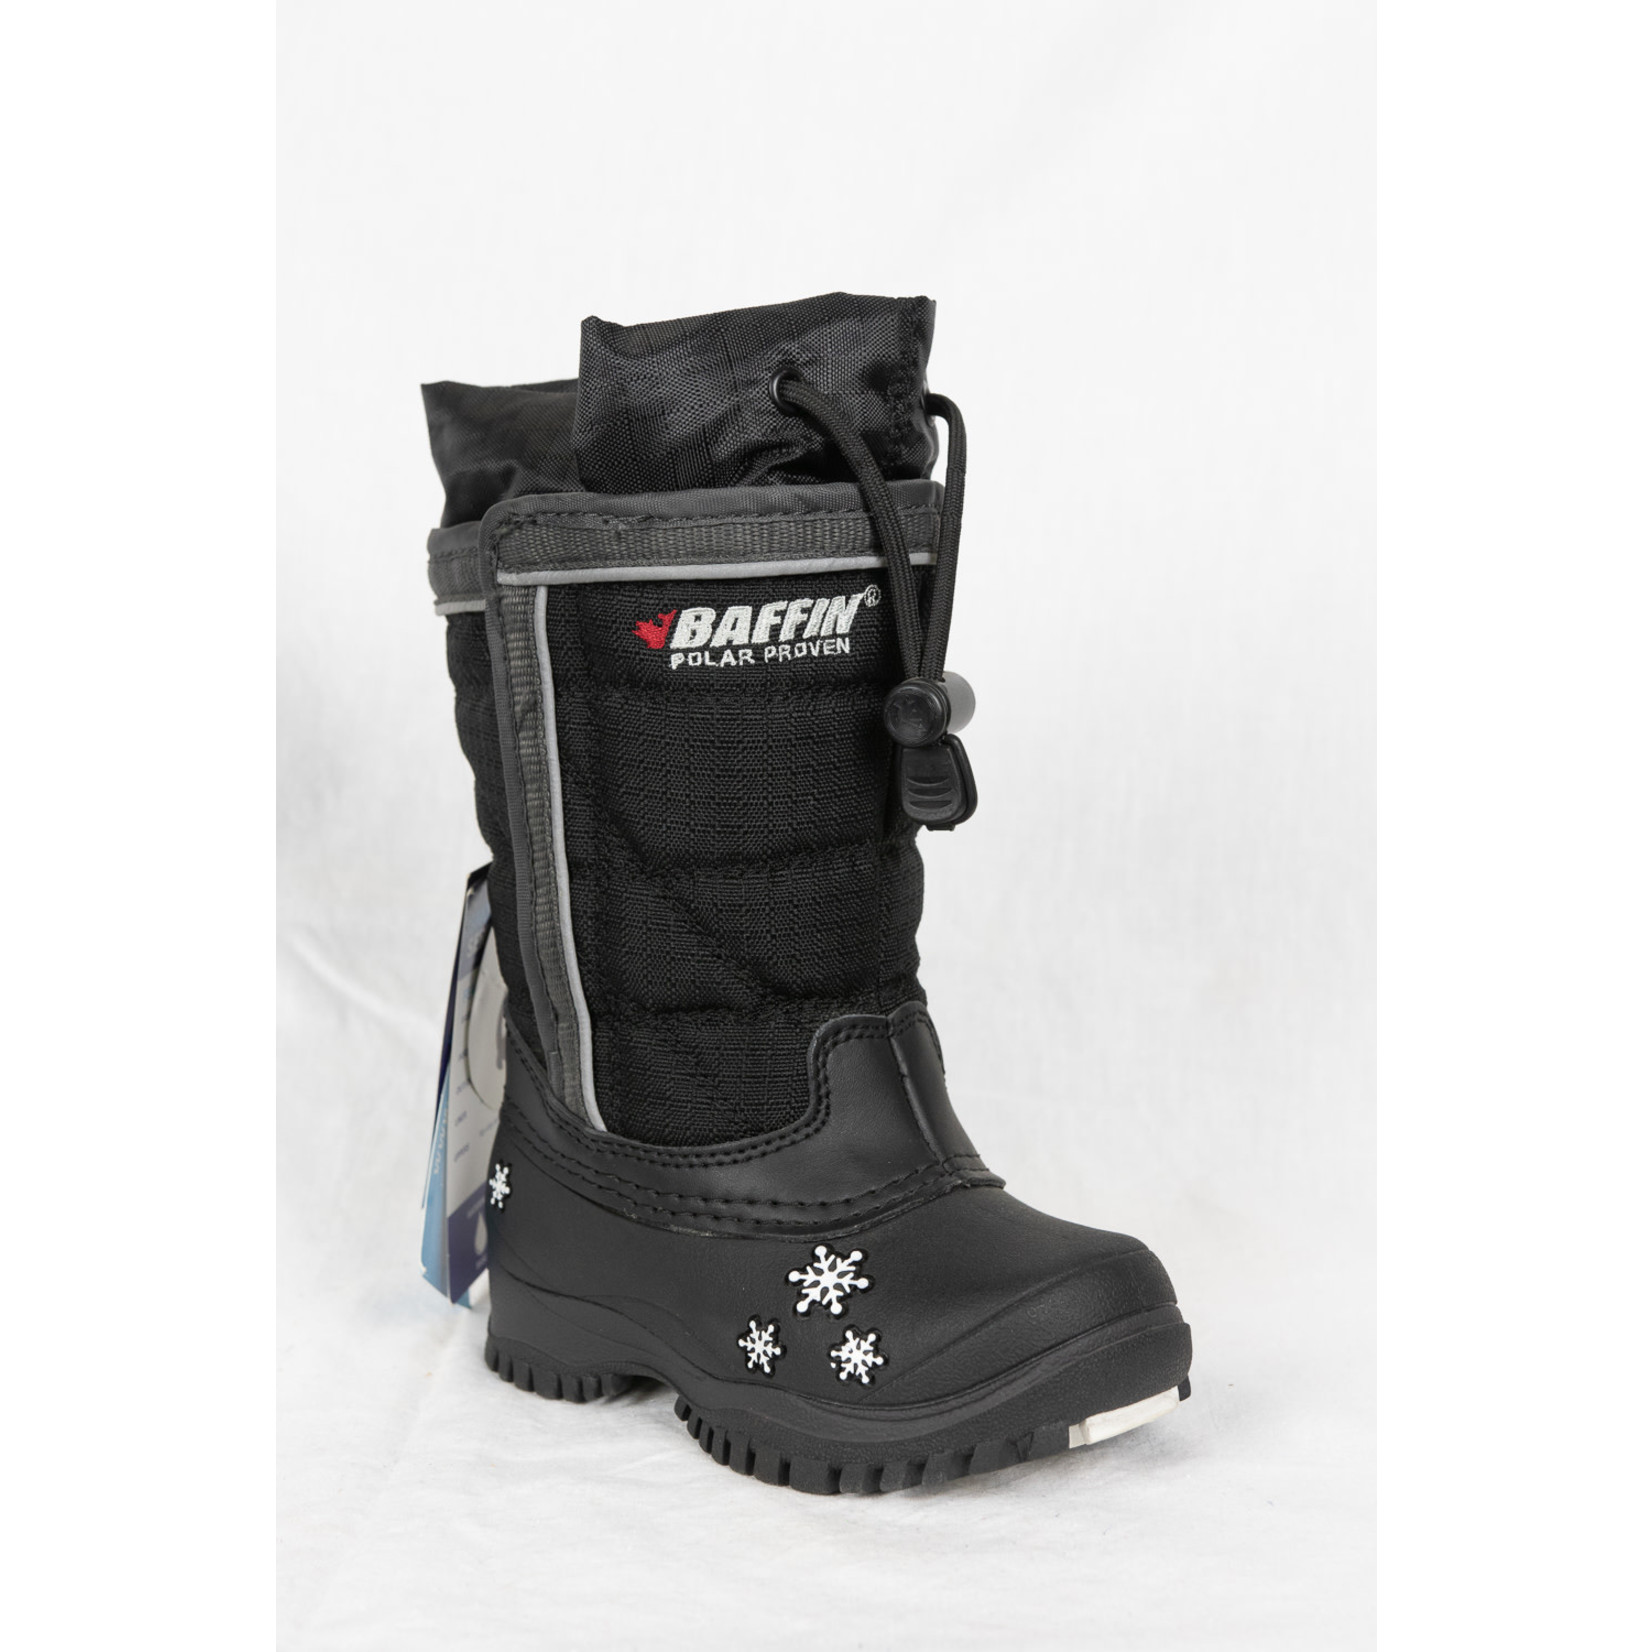 Baffin Baffin Winter Girls Boots Cheree -40C Kids With Boot Liners